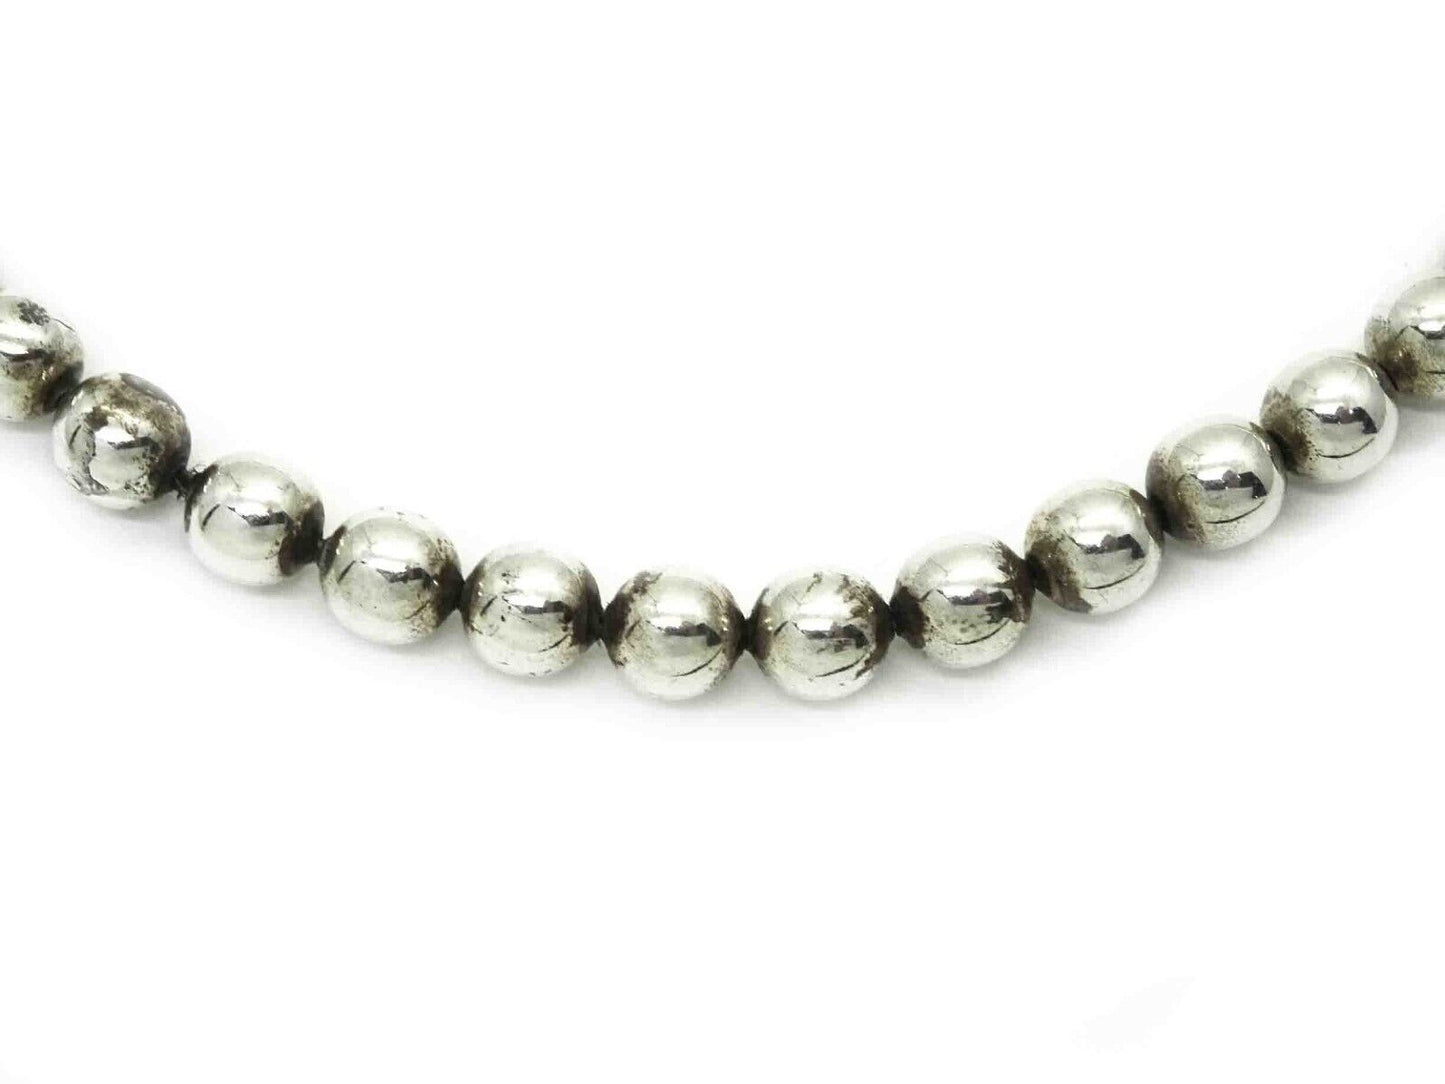 Old Pawn Taxco Mexico 8mm "Navajo Pearl" Sterling Silver Bead Necklace 16.25"